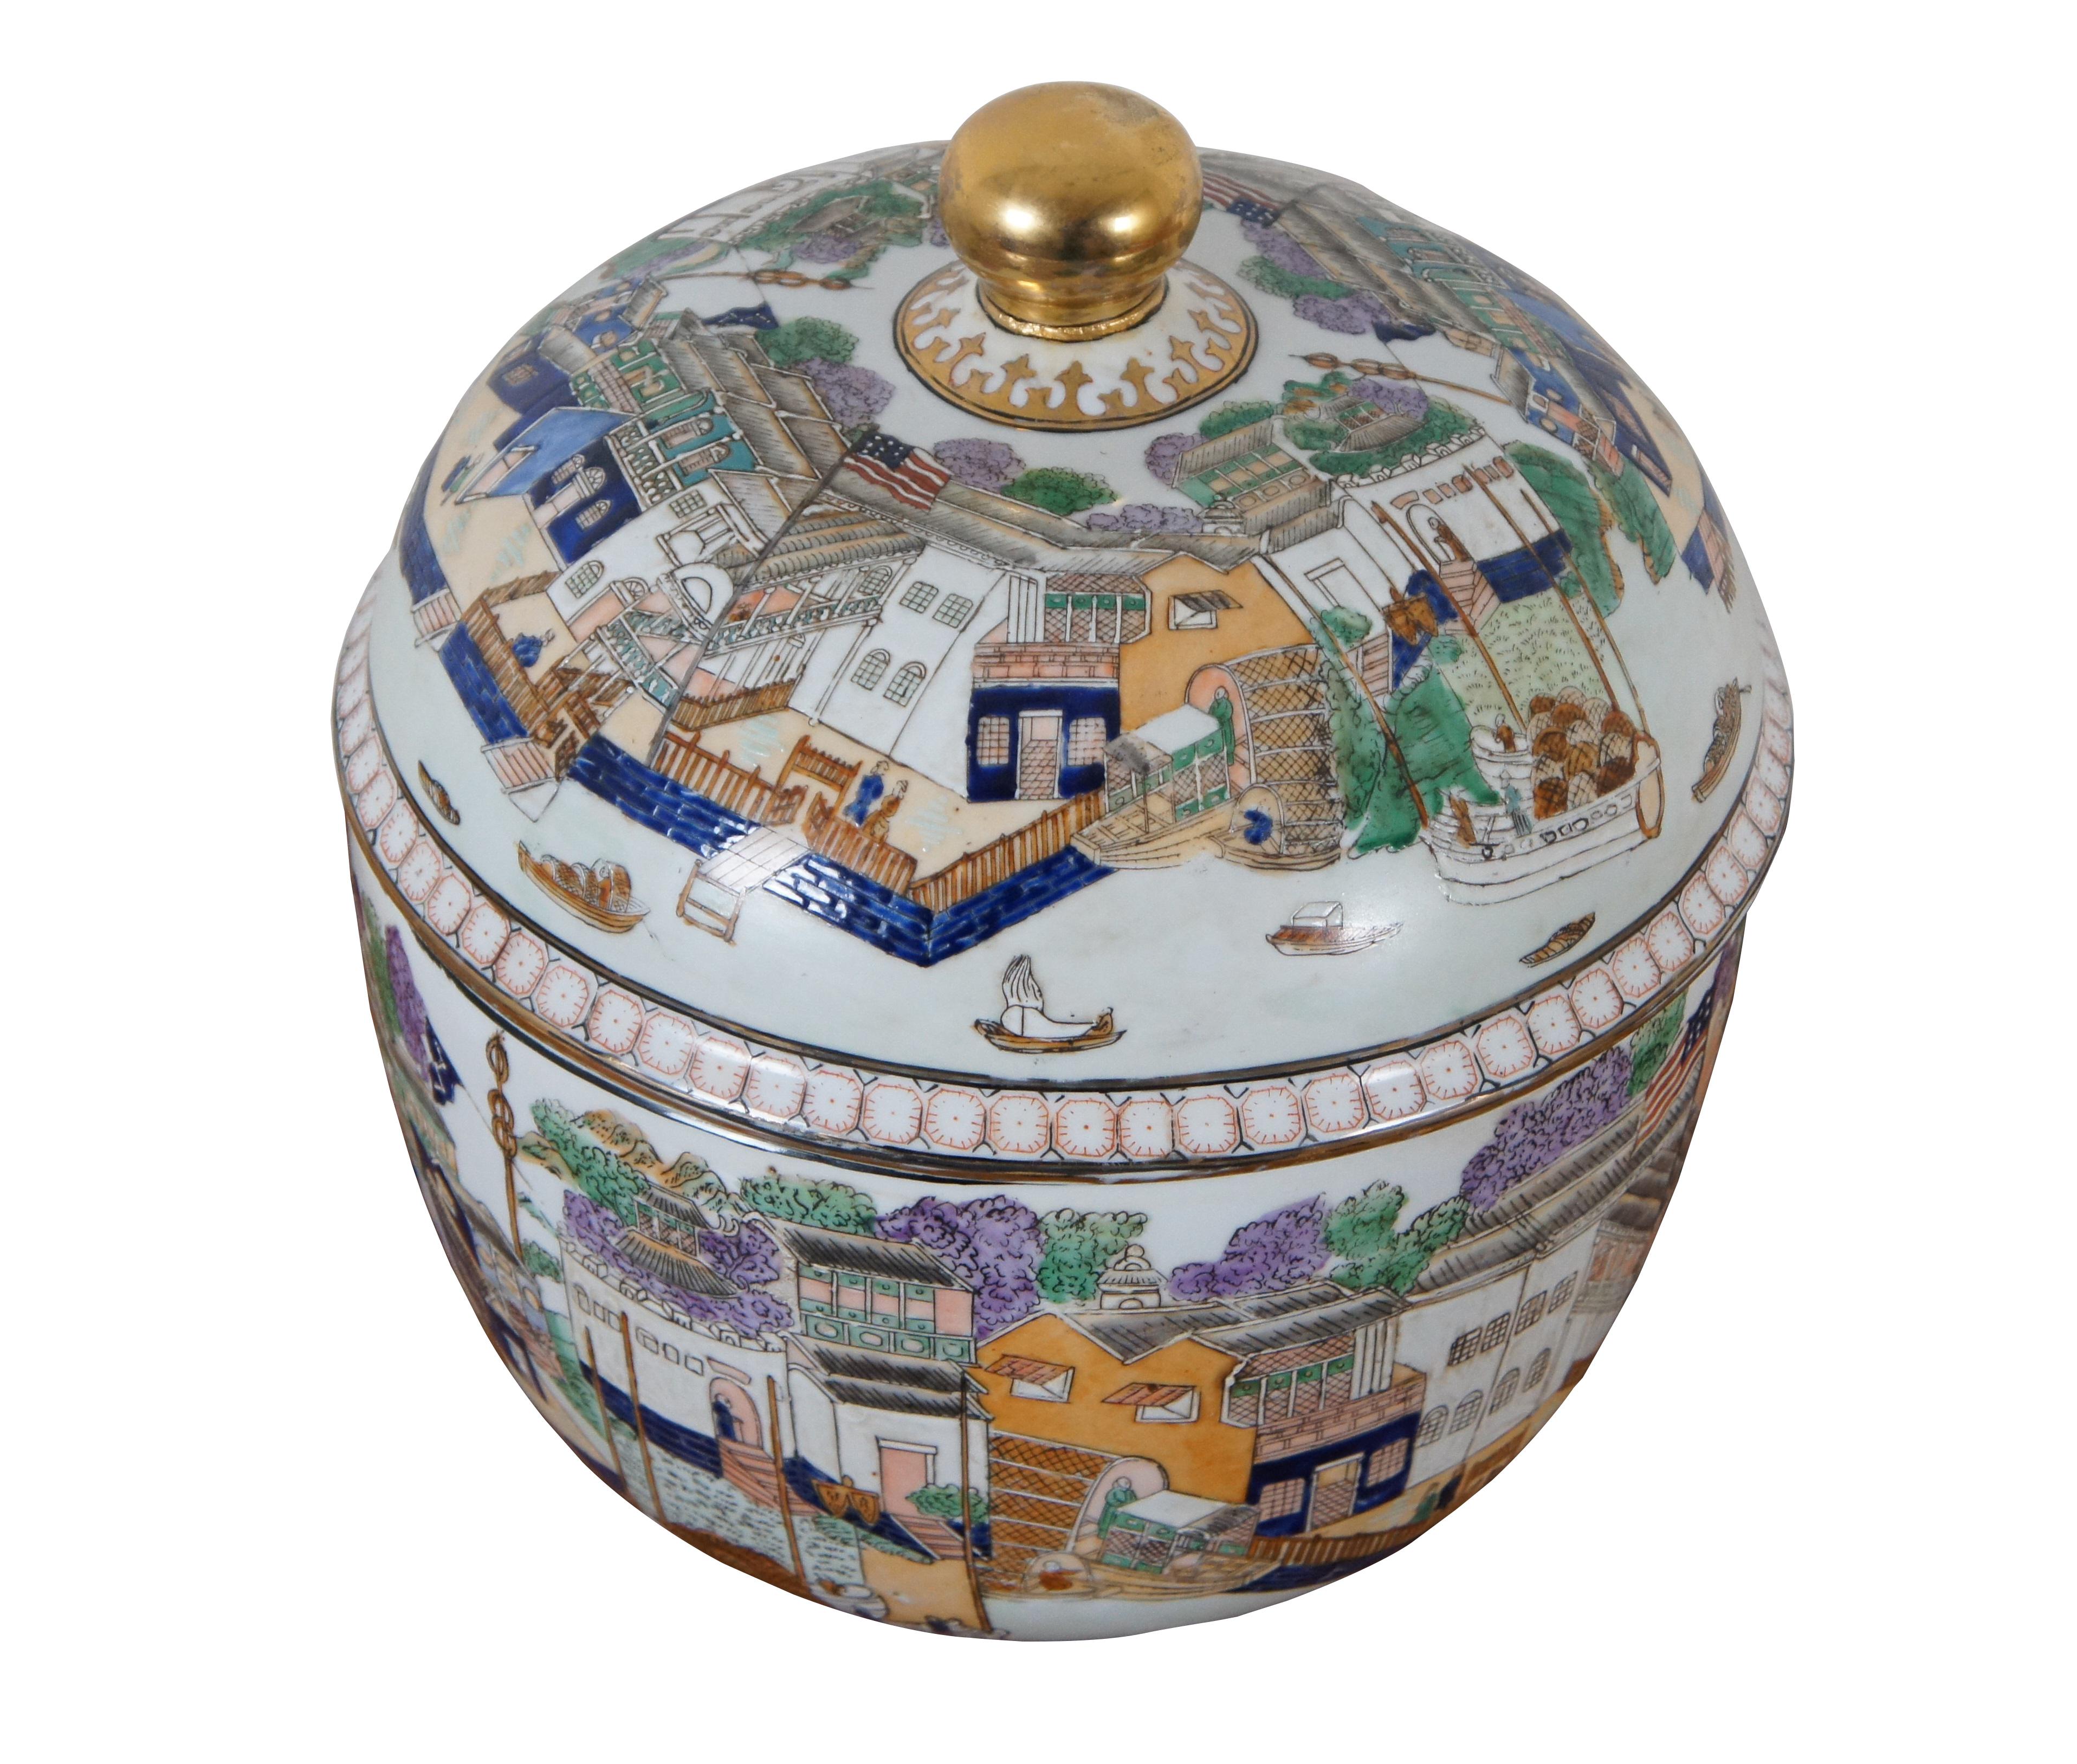 Late 20th century Chinese export moriage style polychrome porcelain lidded urn / jar / centerpiece bowl featuring a panoramic cityscape view along the Pearl River at Guangzhou.  The Hongs—the office, warehouse, and living spaces for foreign